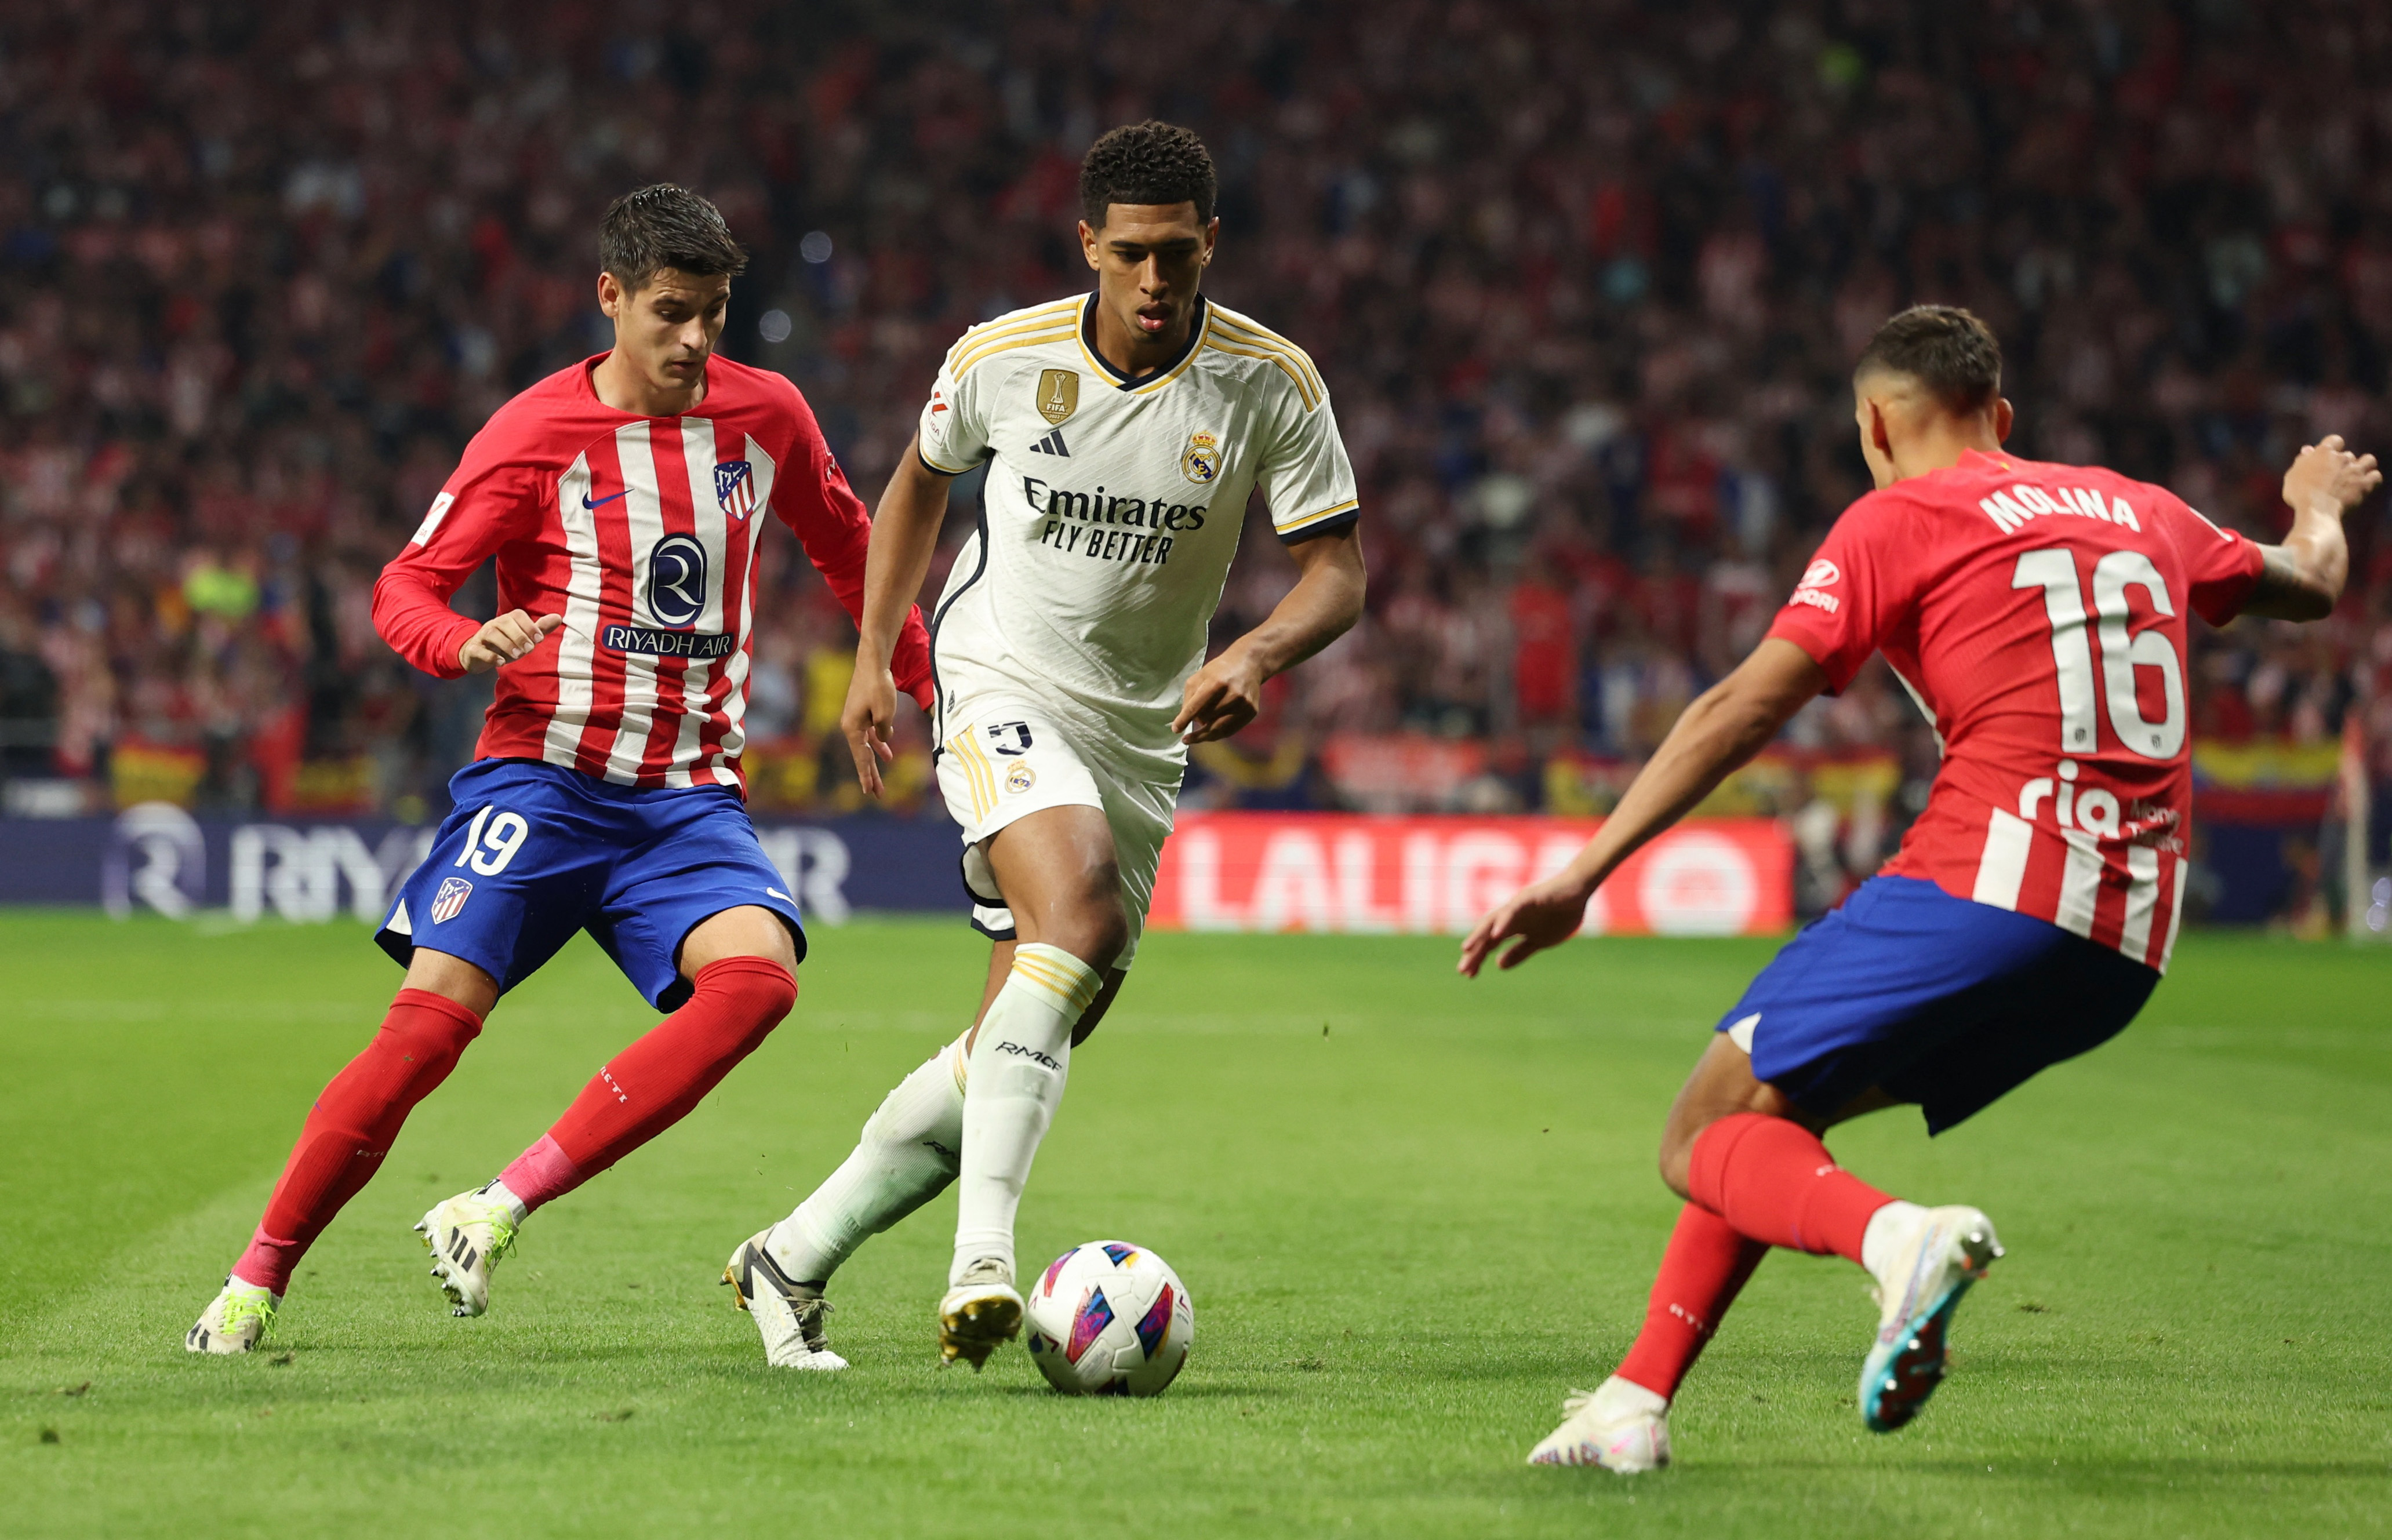 Real Madrid defeats Atletico Madrid in penalty shootout for